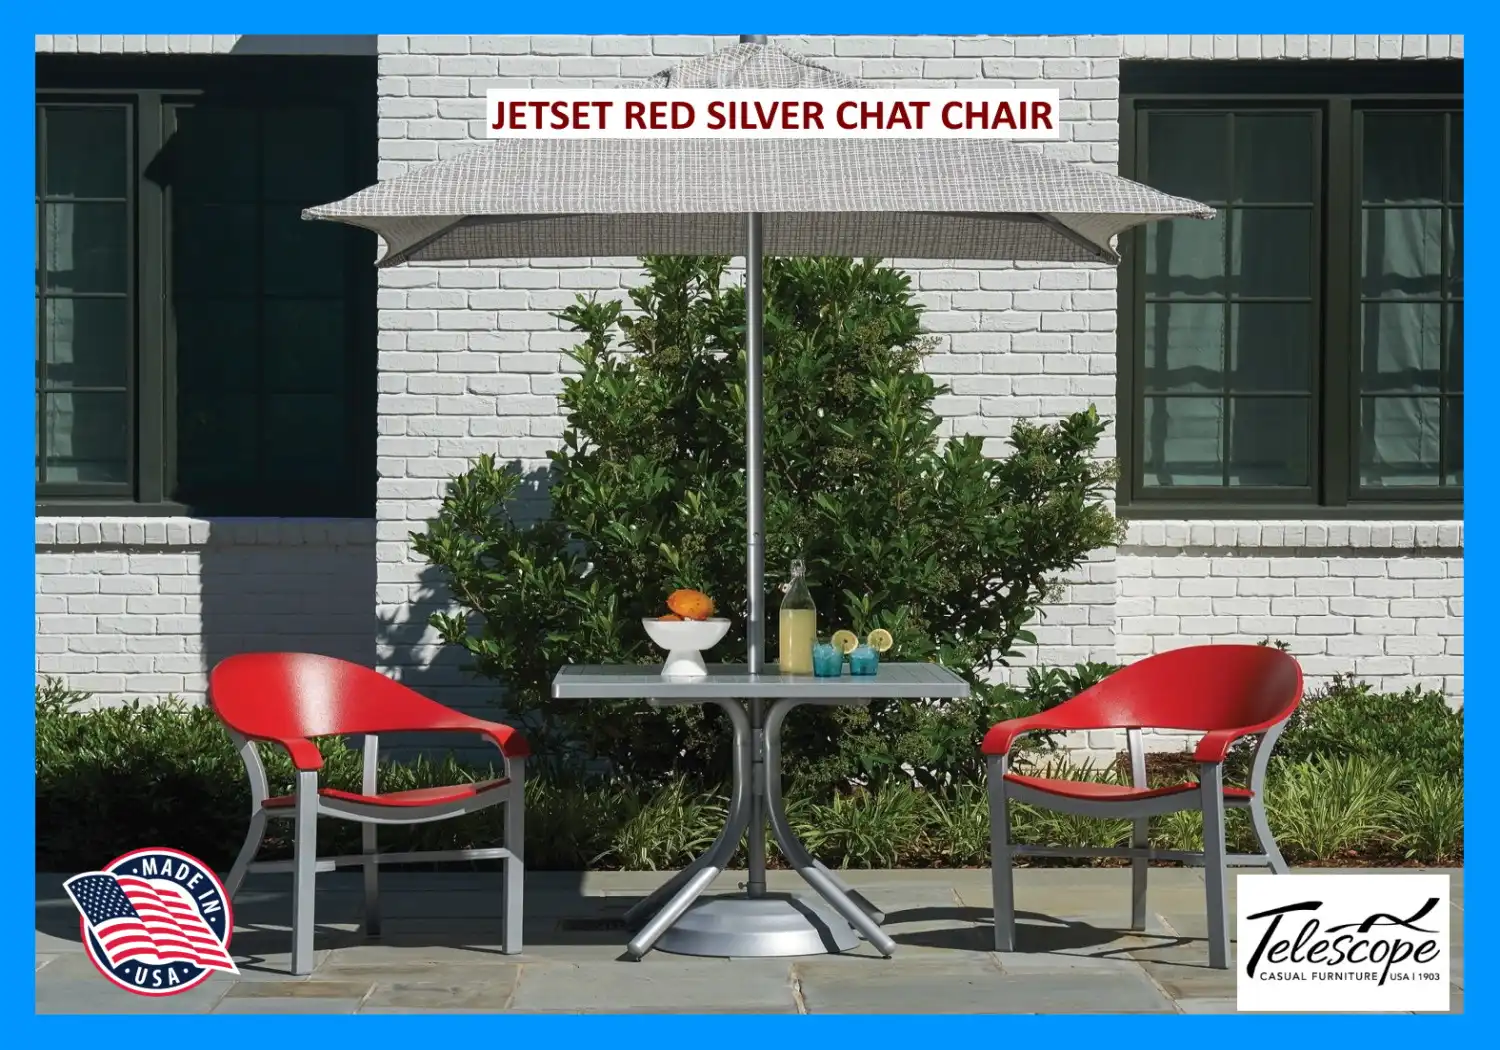 JETSET RED SILVER CHAT CHAIR